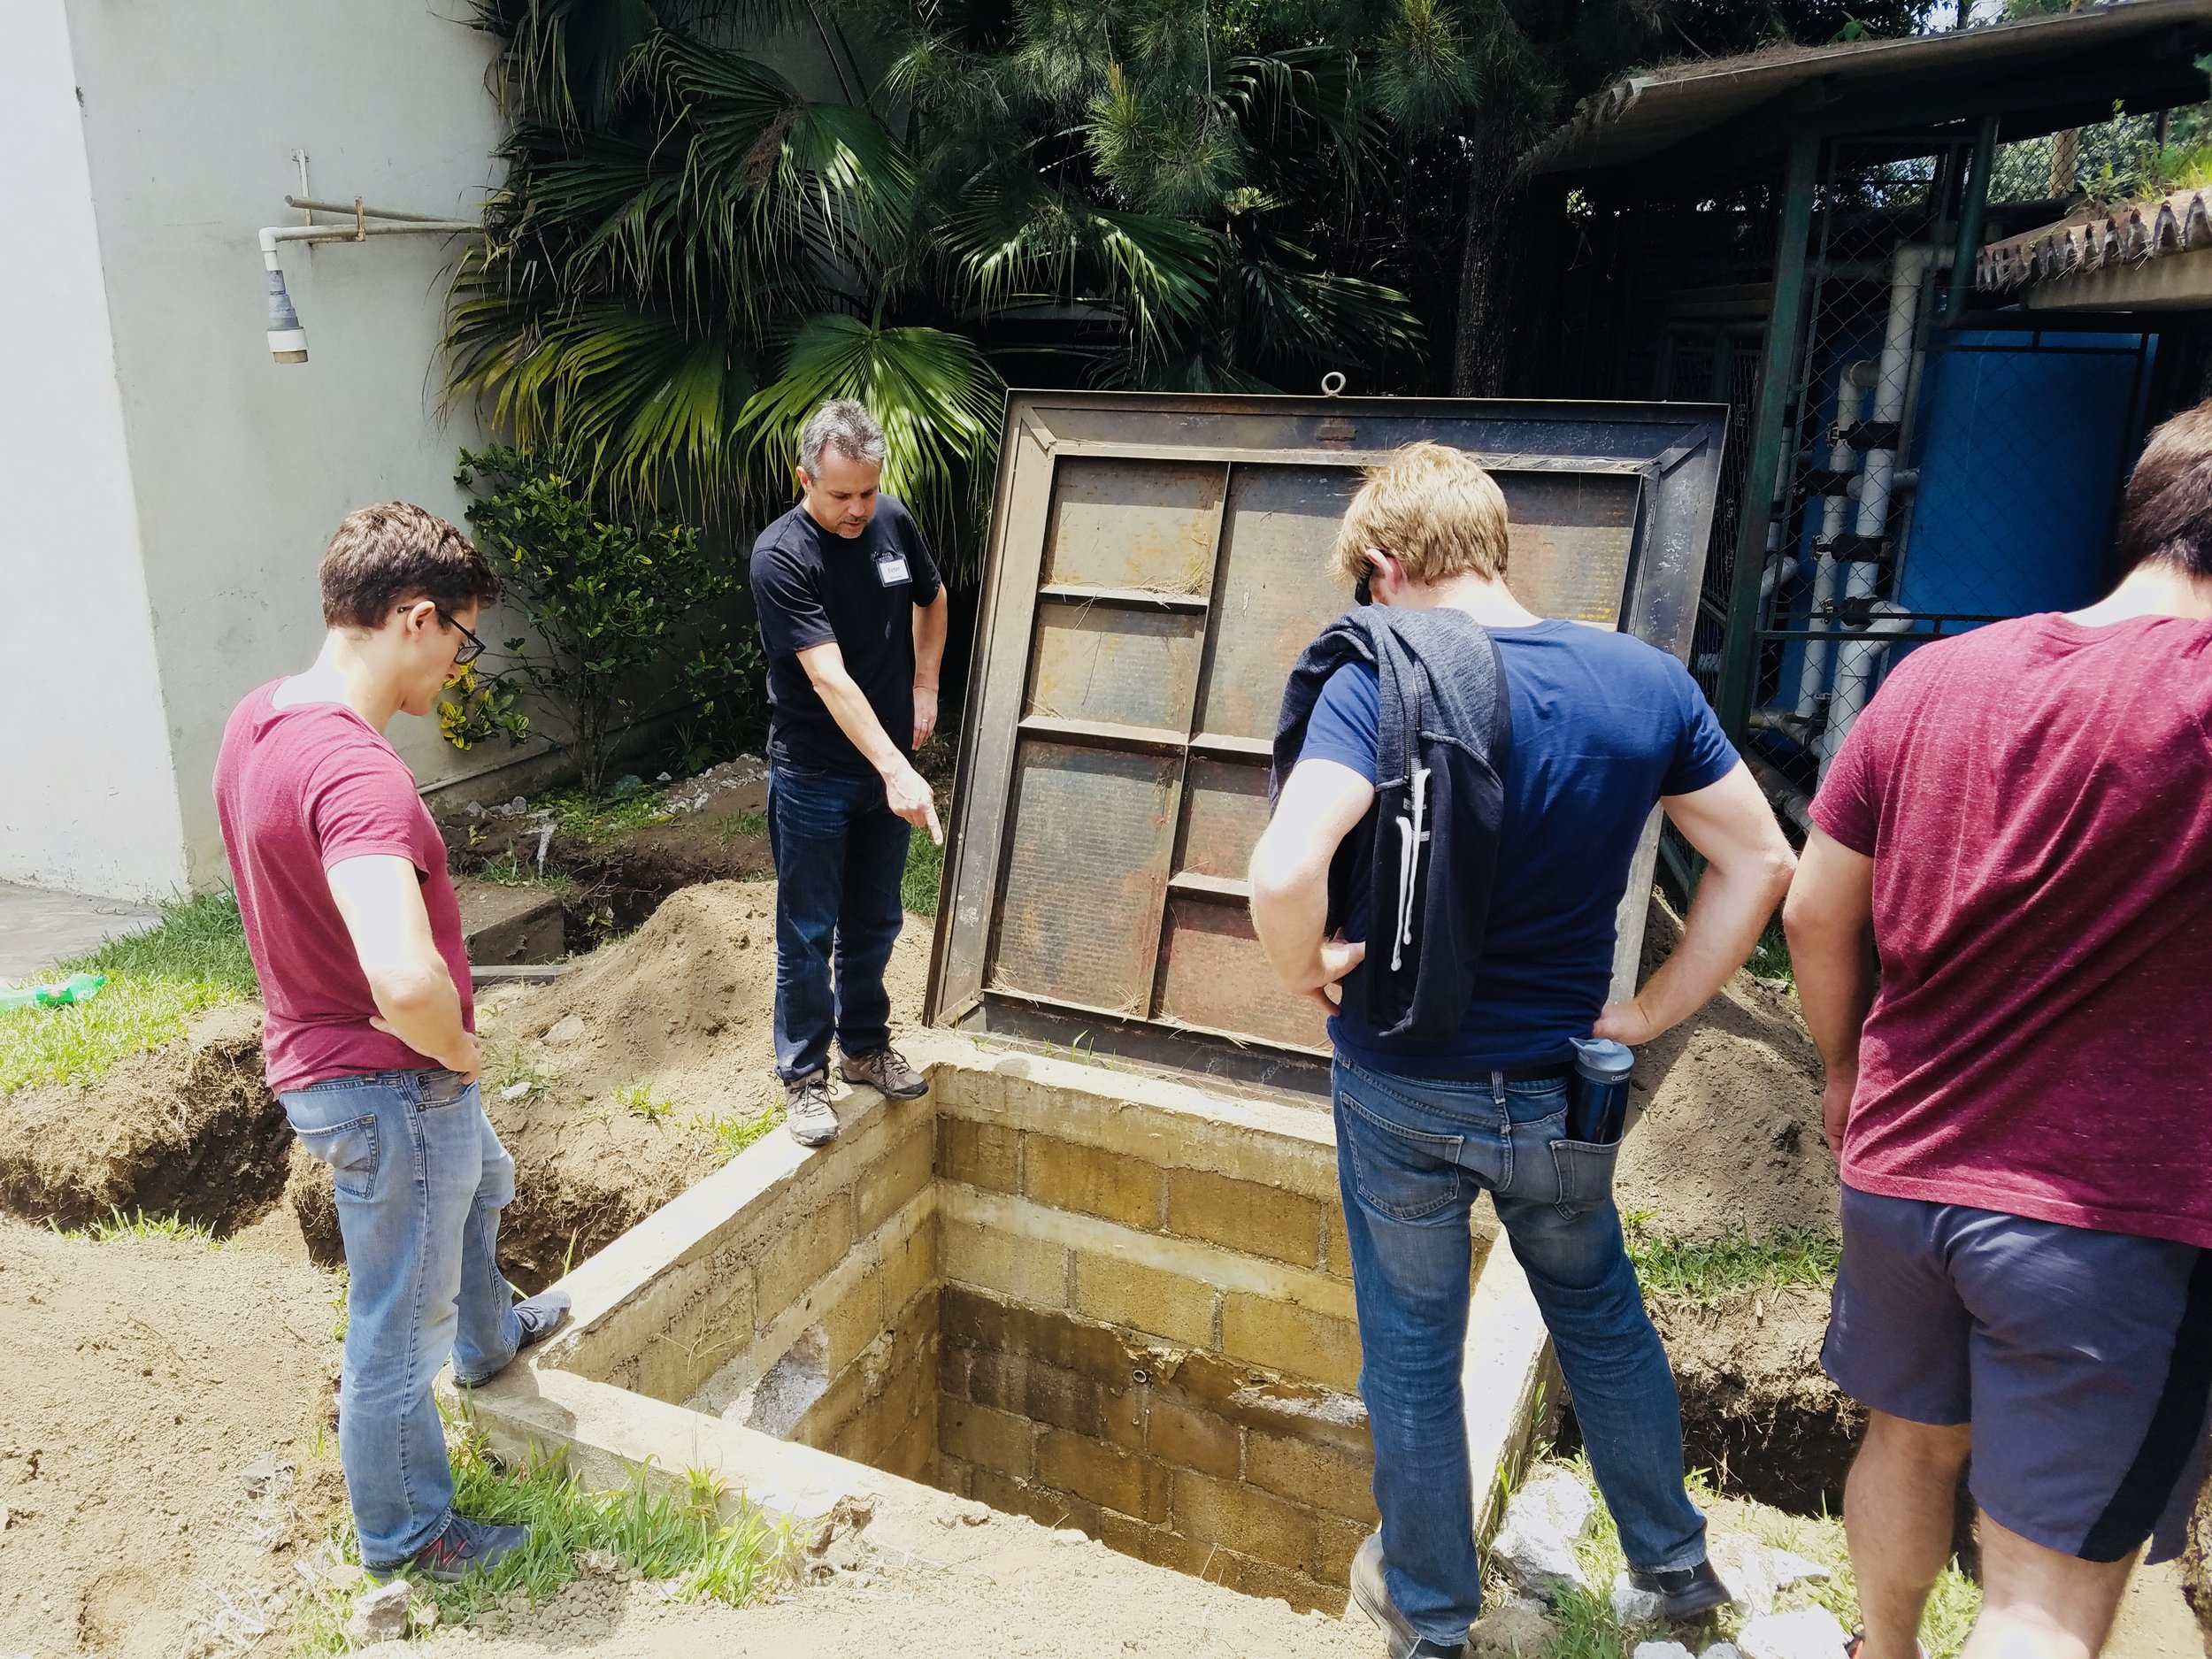 Members survey the water storage system during the 2017 Guatemala Project implementation trip.